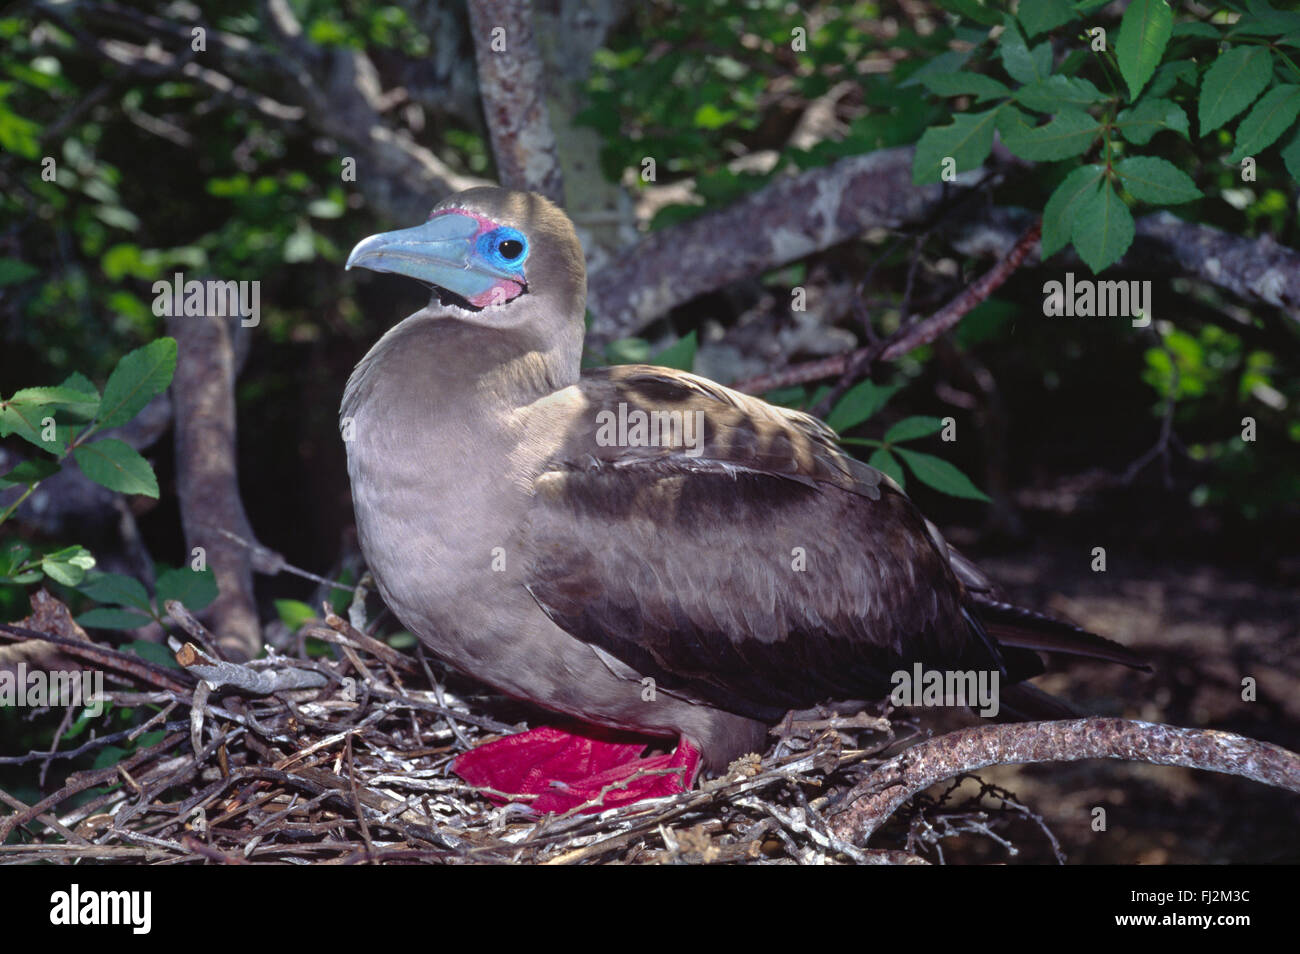 RED-FOOTED BOOBY BIRD (Sula sula), the smallest of the Galapagos